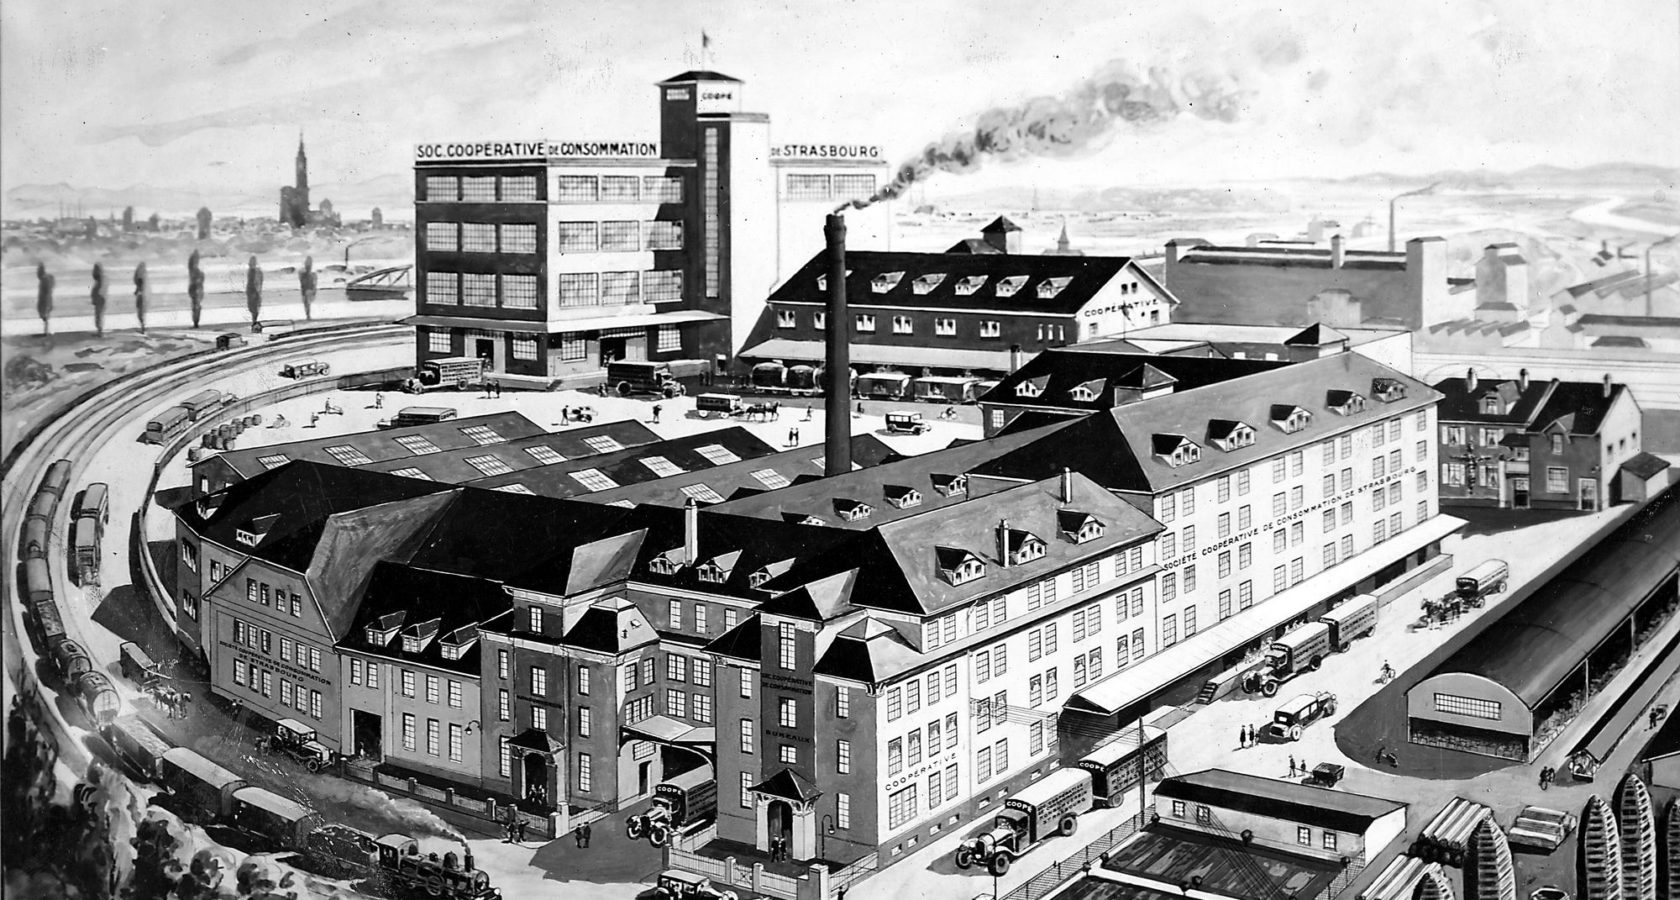 Period illustration showing an aerial view of the Coop headquarters.